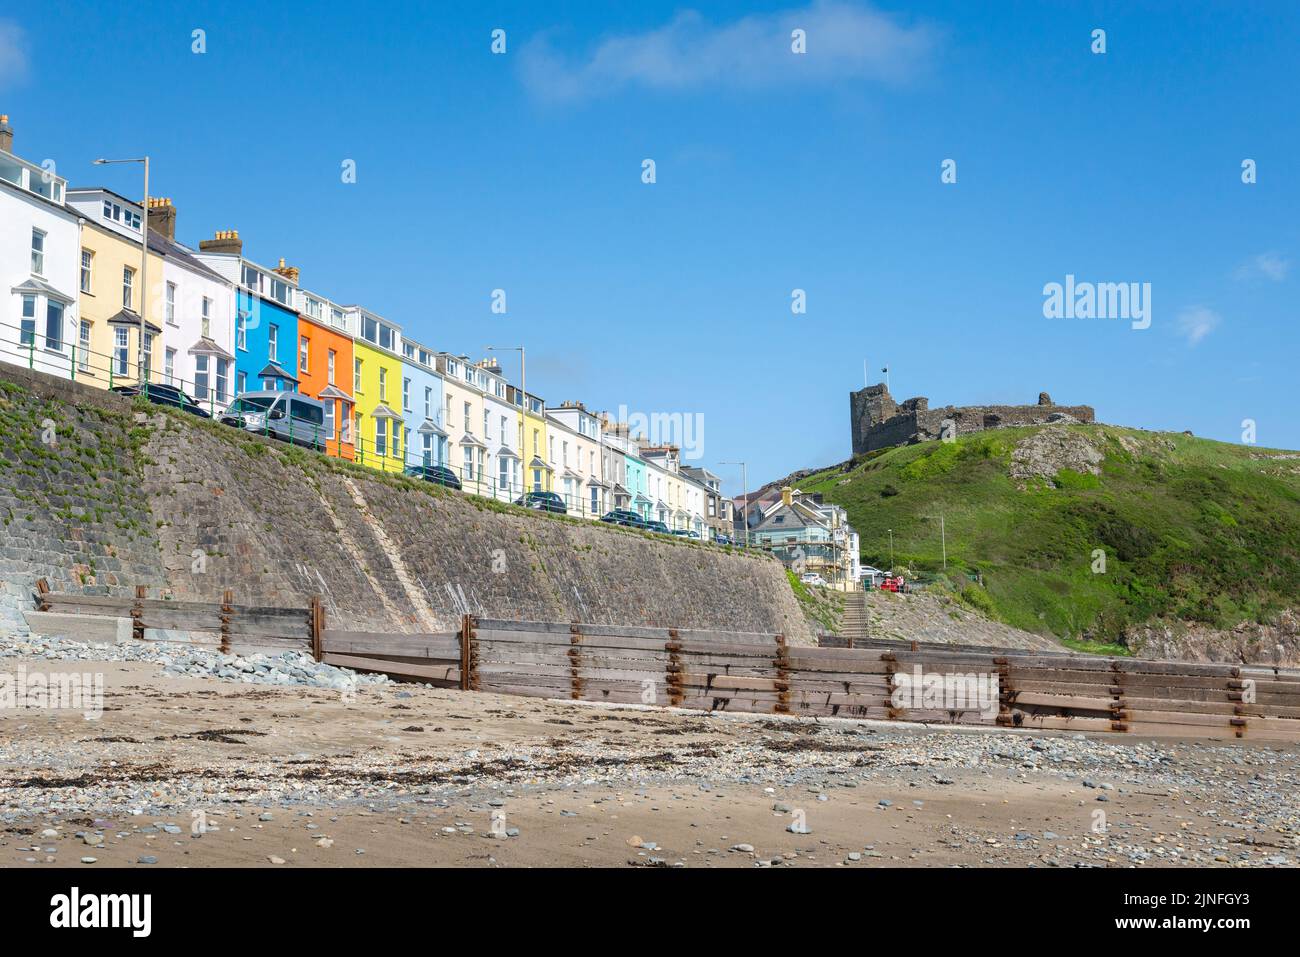 Criccieth castle and marine terrace seen from the beach on the coast of Gwynedd, North Wales. Stock Photo